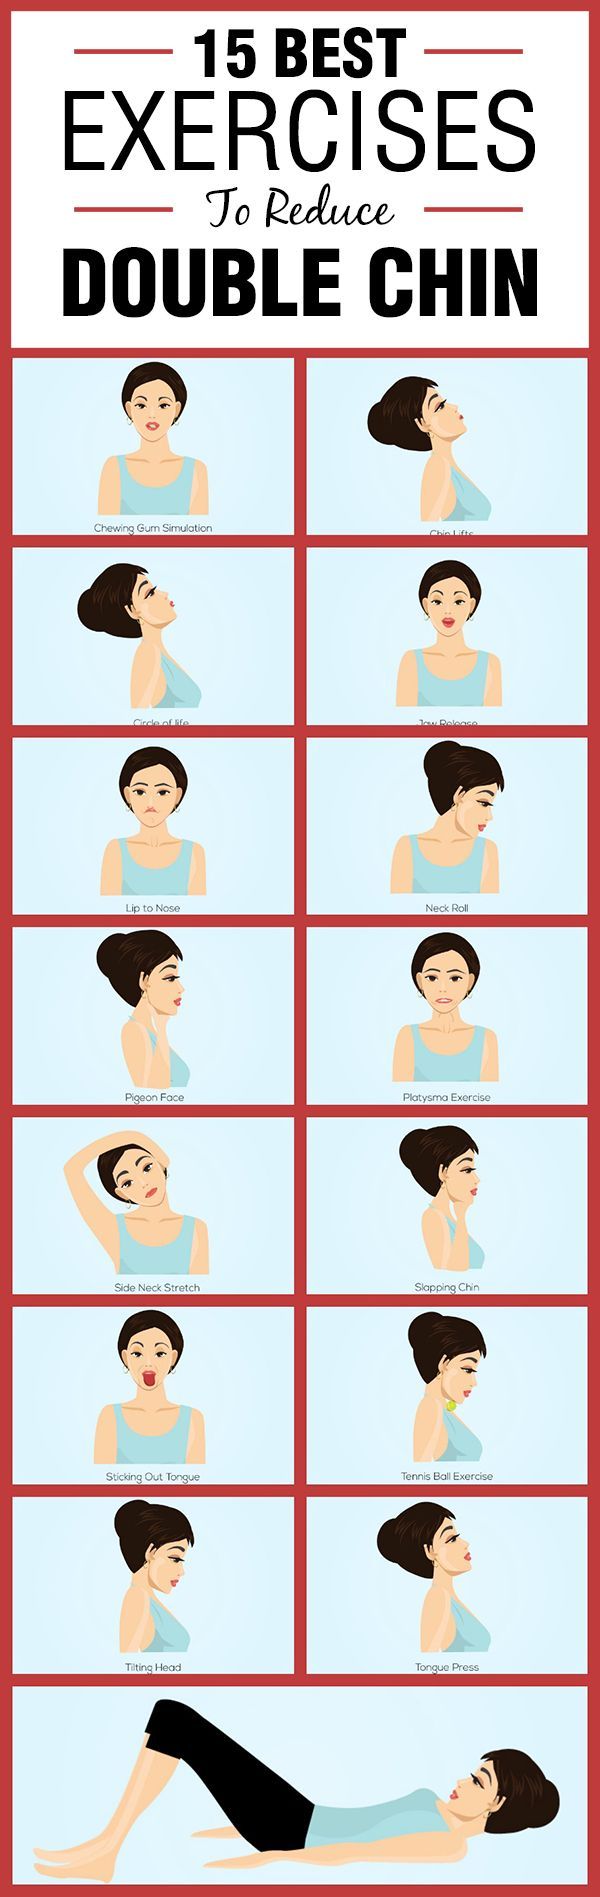 15 Best Exercises to Reduce Double Chin – Simple exercises that can help you get rid of double chin